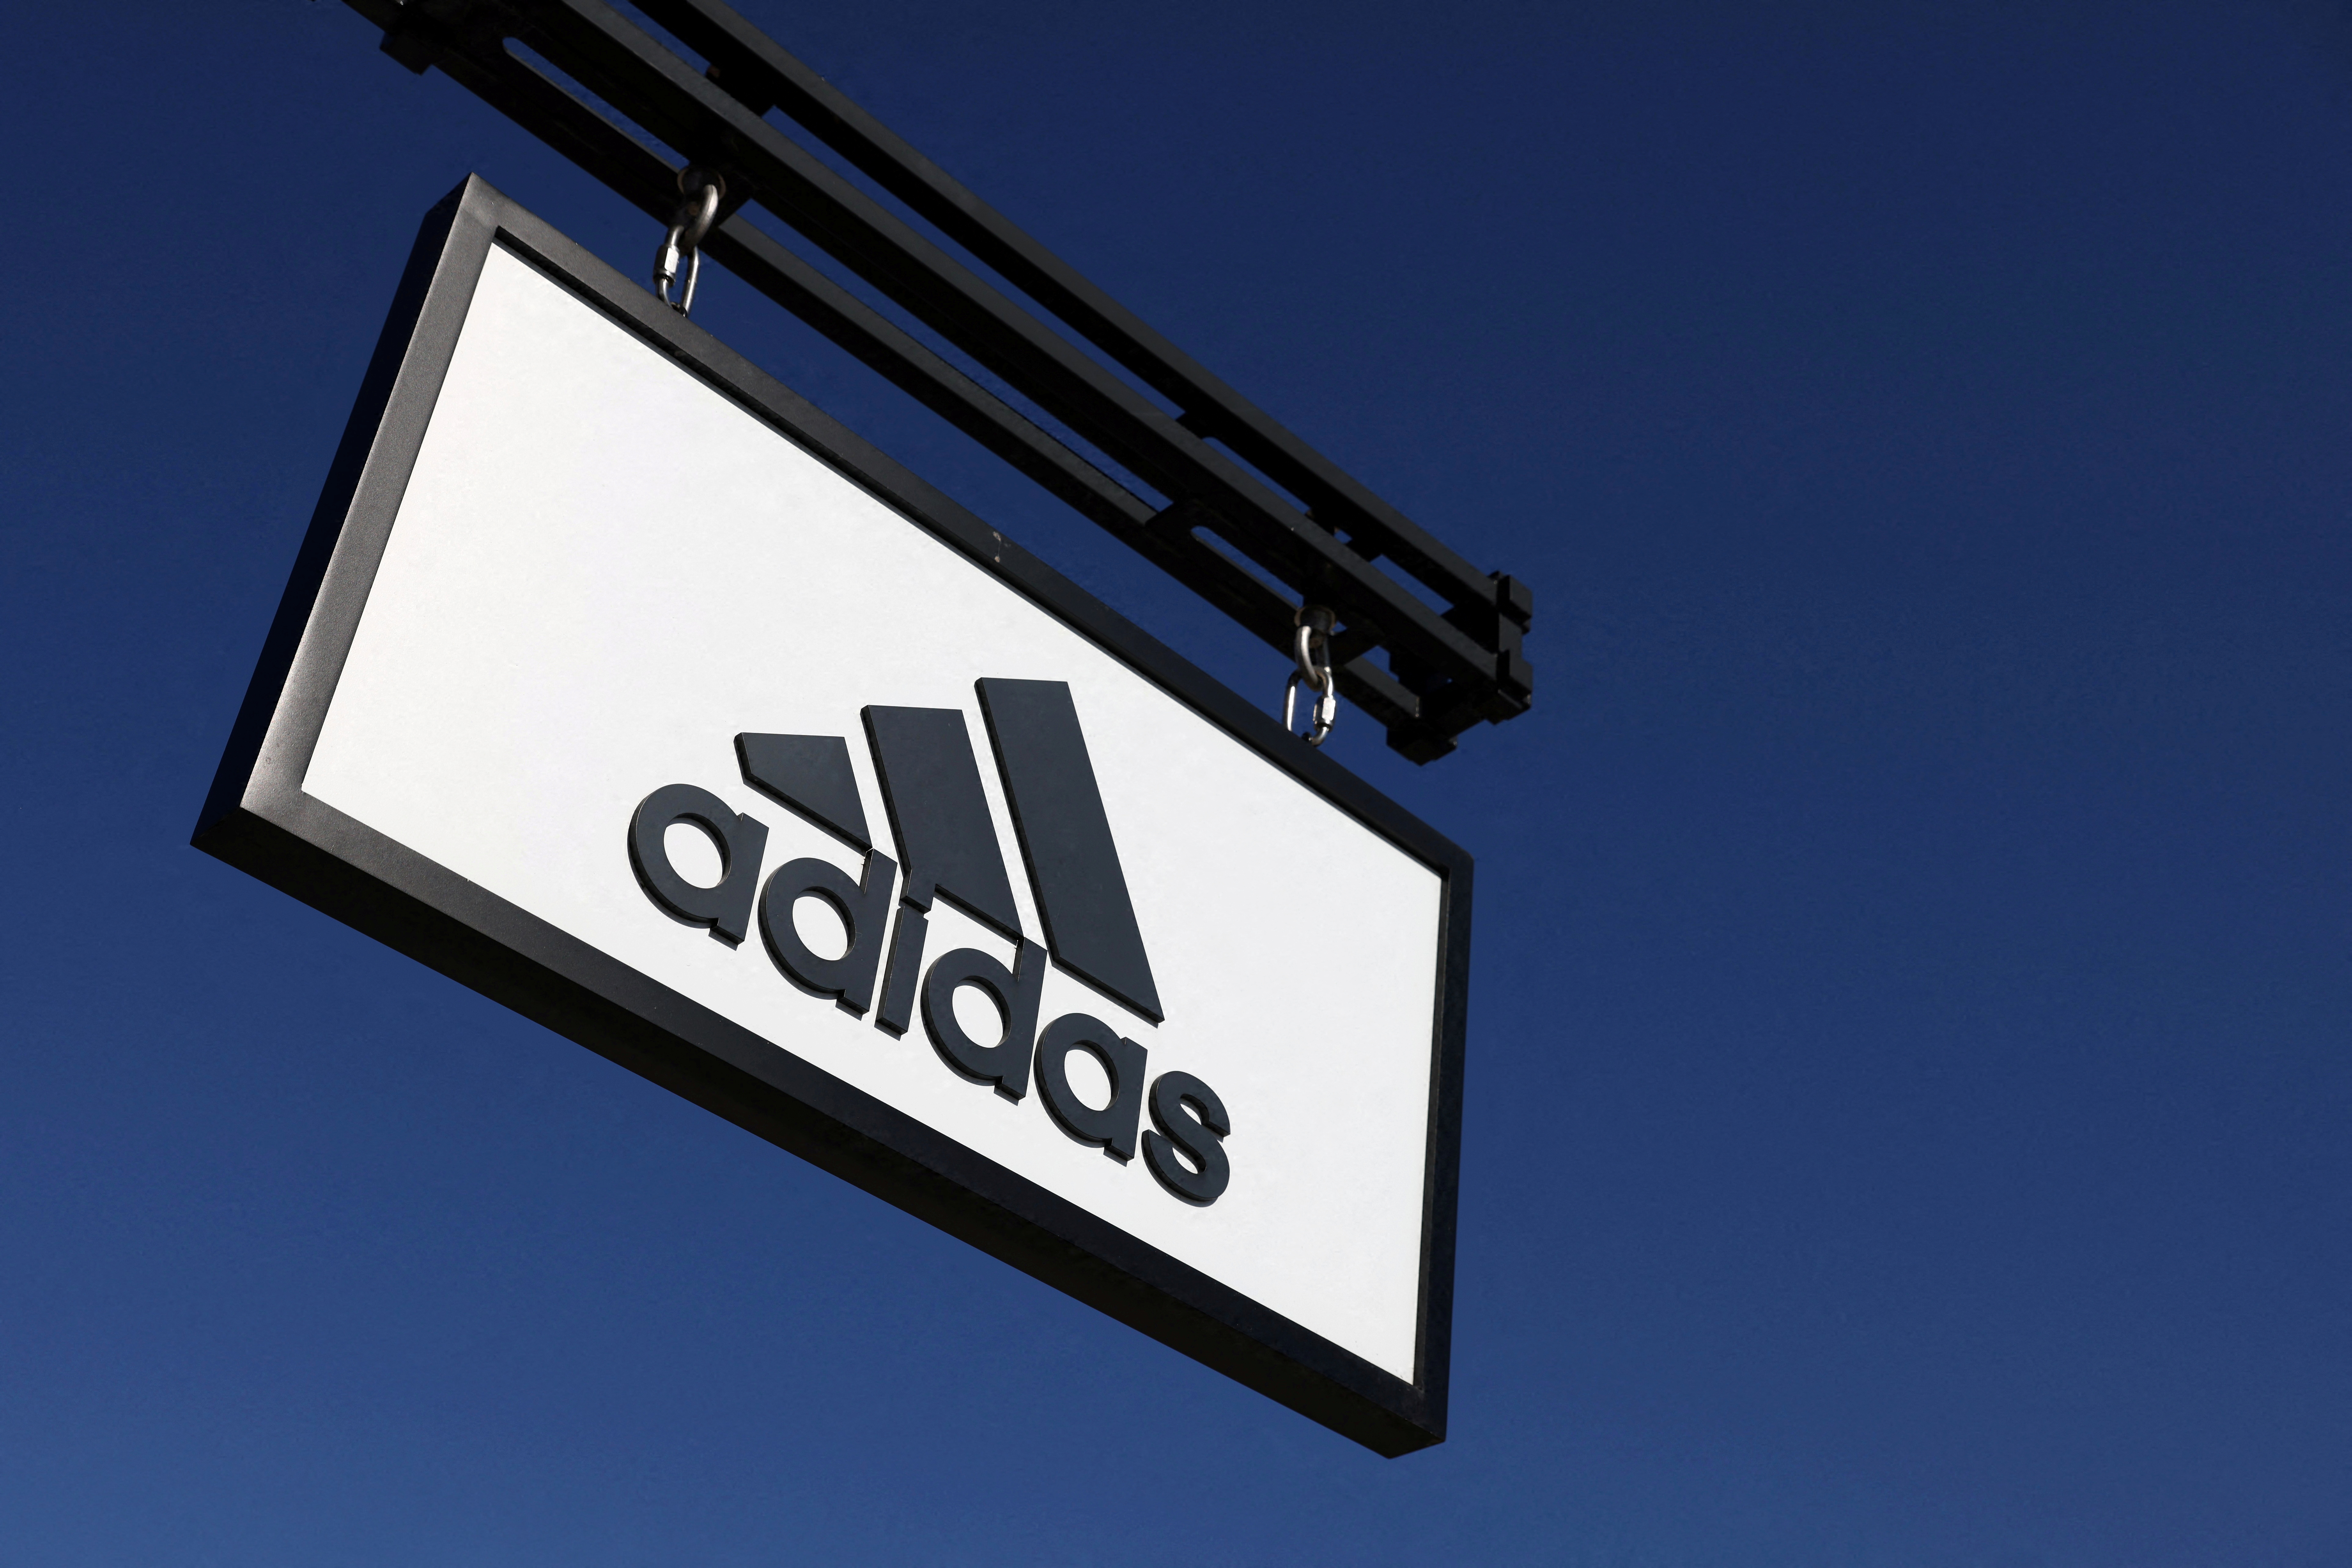 Adidas store at the Woodbury Common Premium Outlets in Central Valley, New York